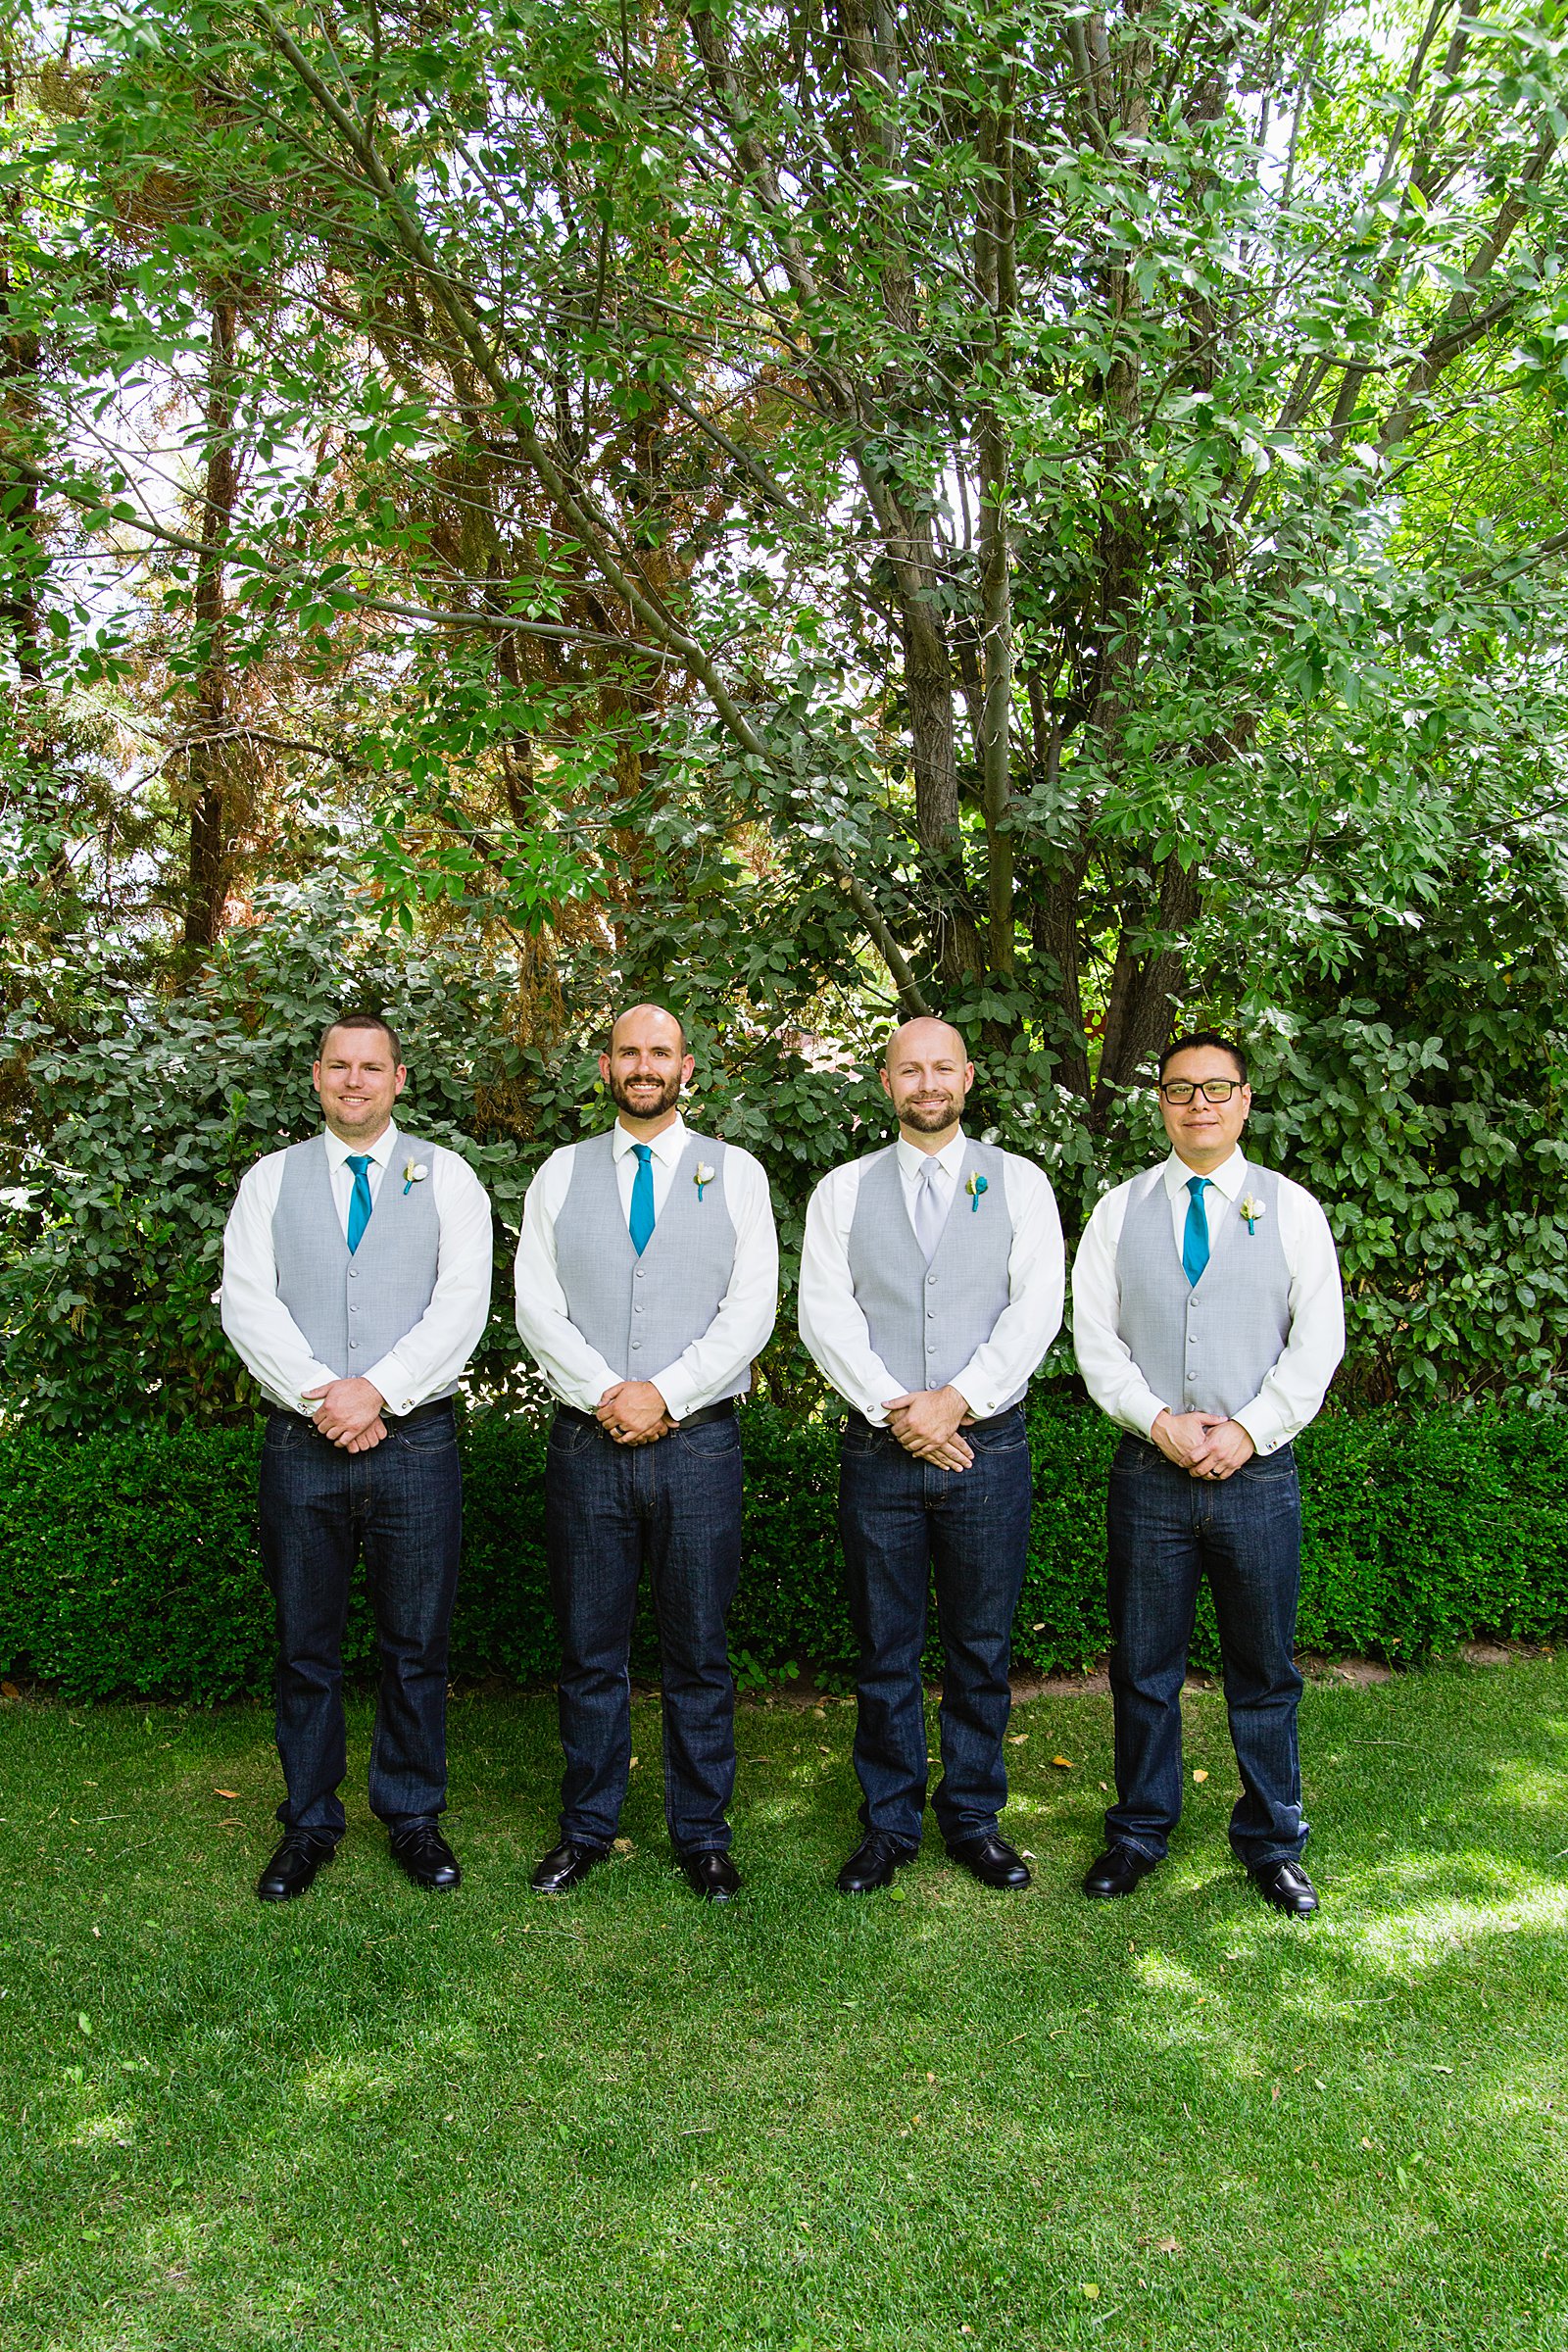 Groom and groomsmen together at a The Windmill House wedding by Arizona wedding photographer PMA Photography.